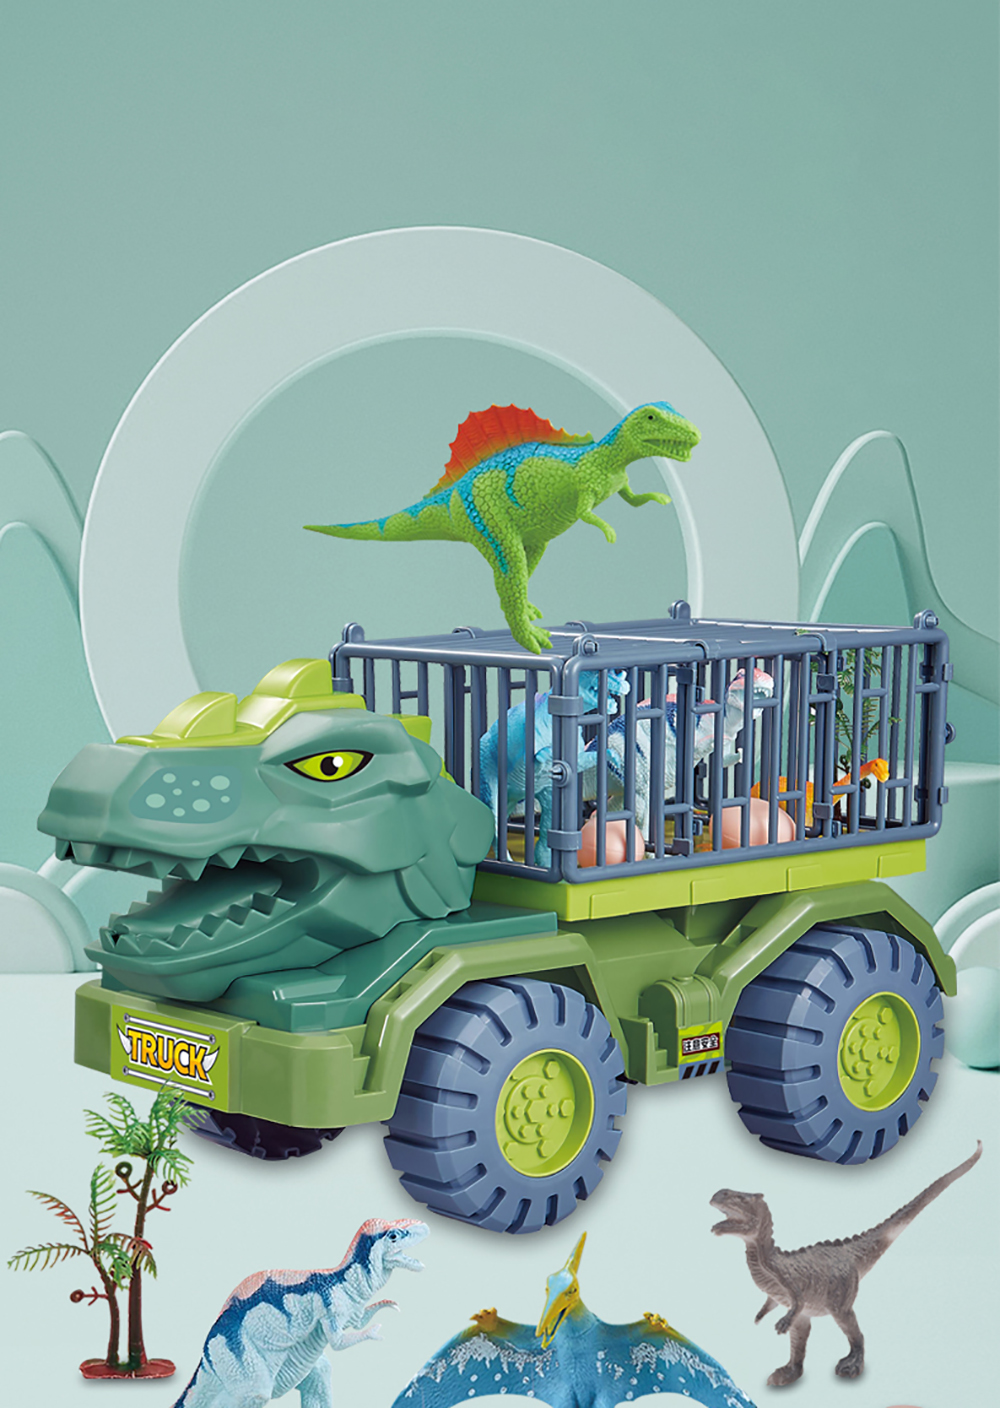 New-Style-Children-Dinosaur-Transport-Car-Inertial-Cars-Carrier-Truck-Toy-Pull-Back-Vehicle-Toy-with-1902704-1